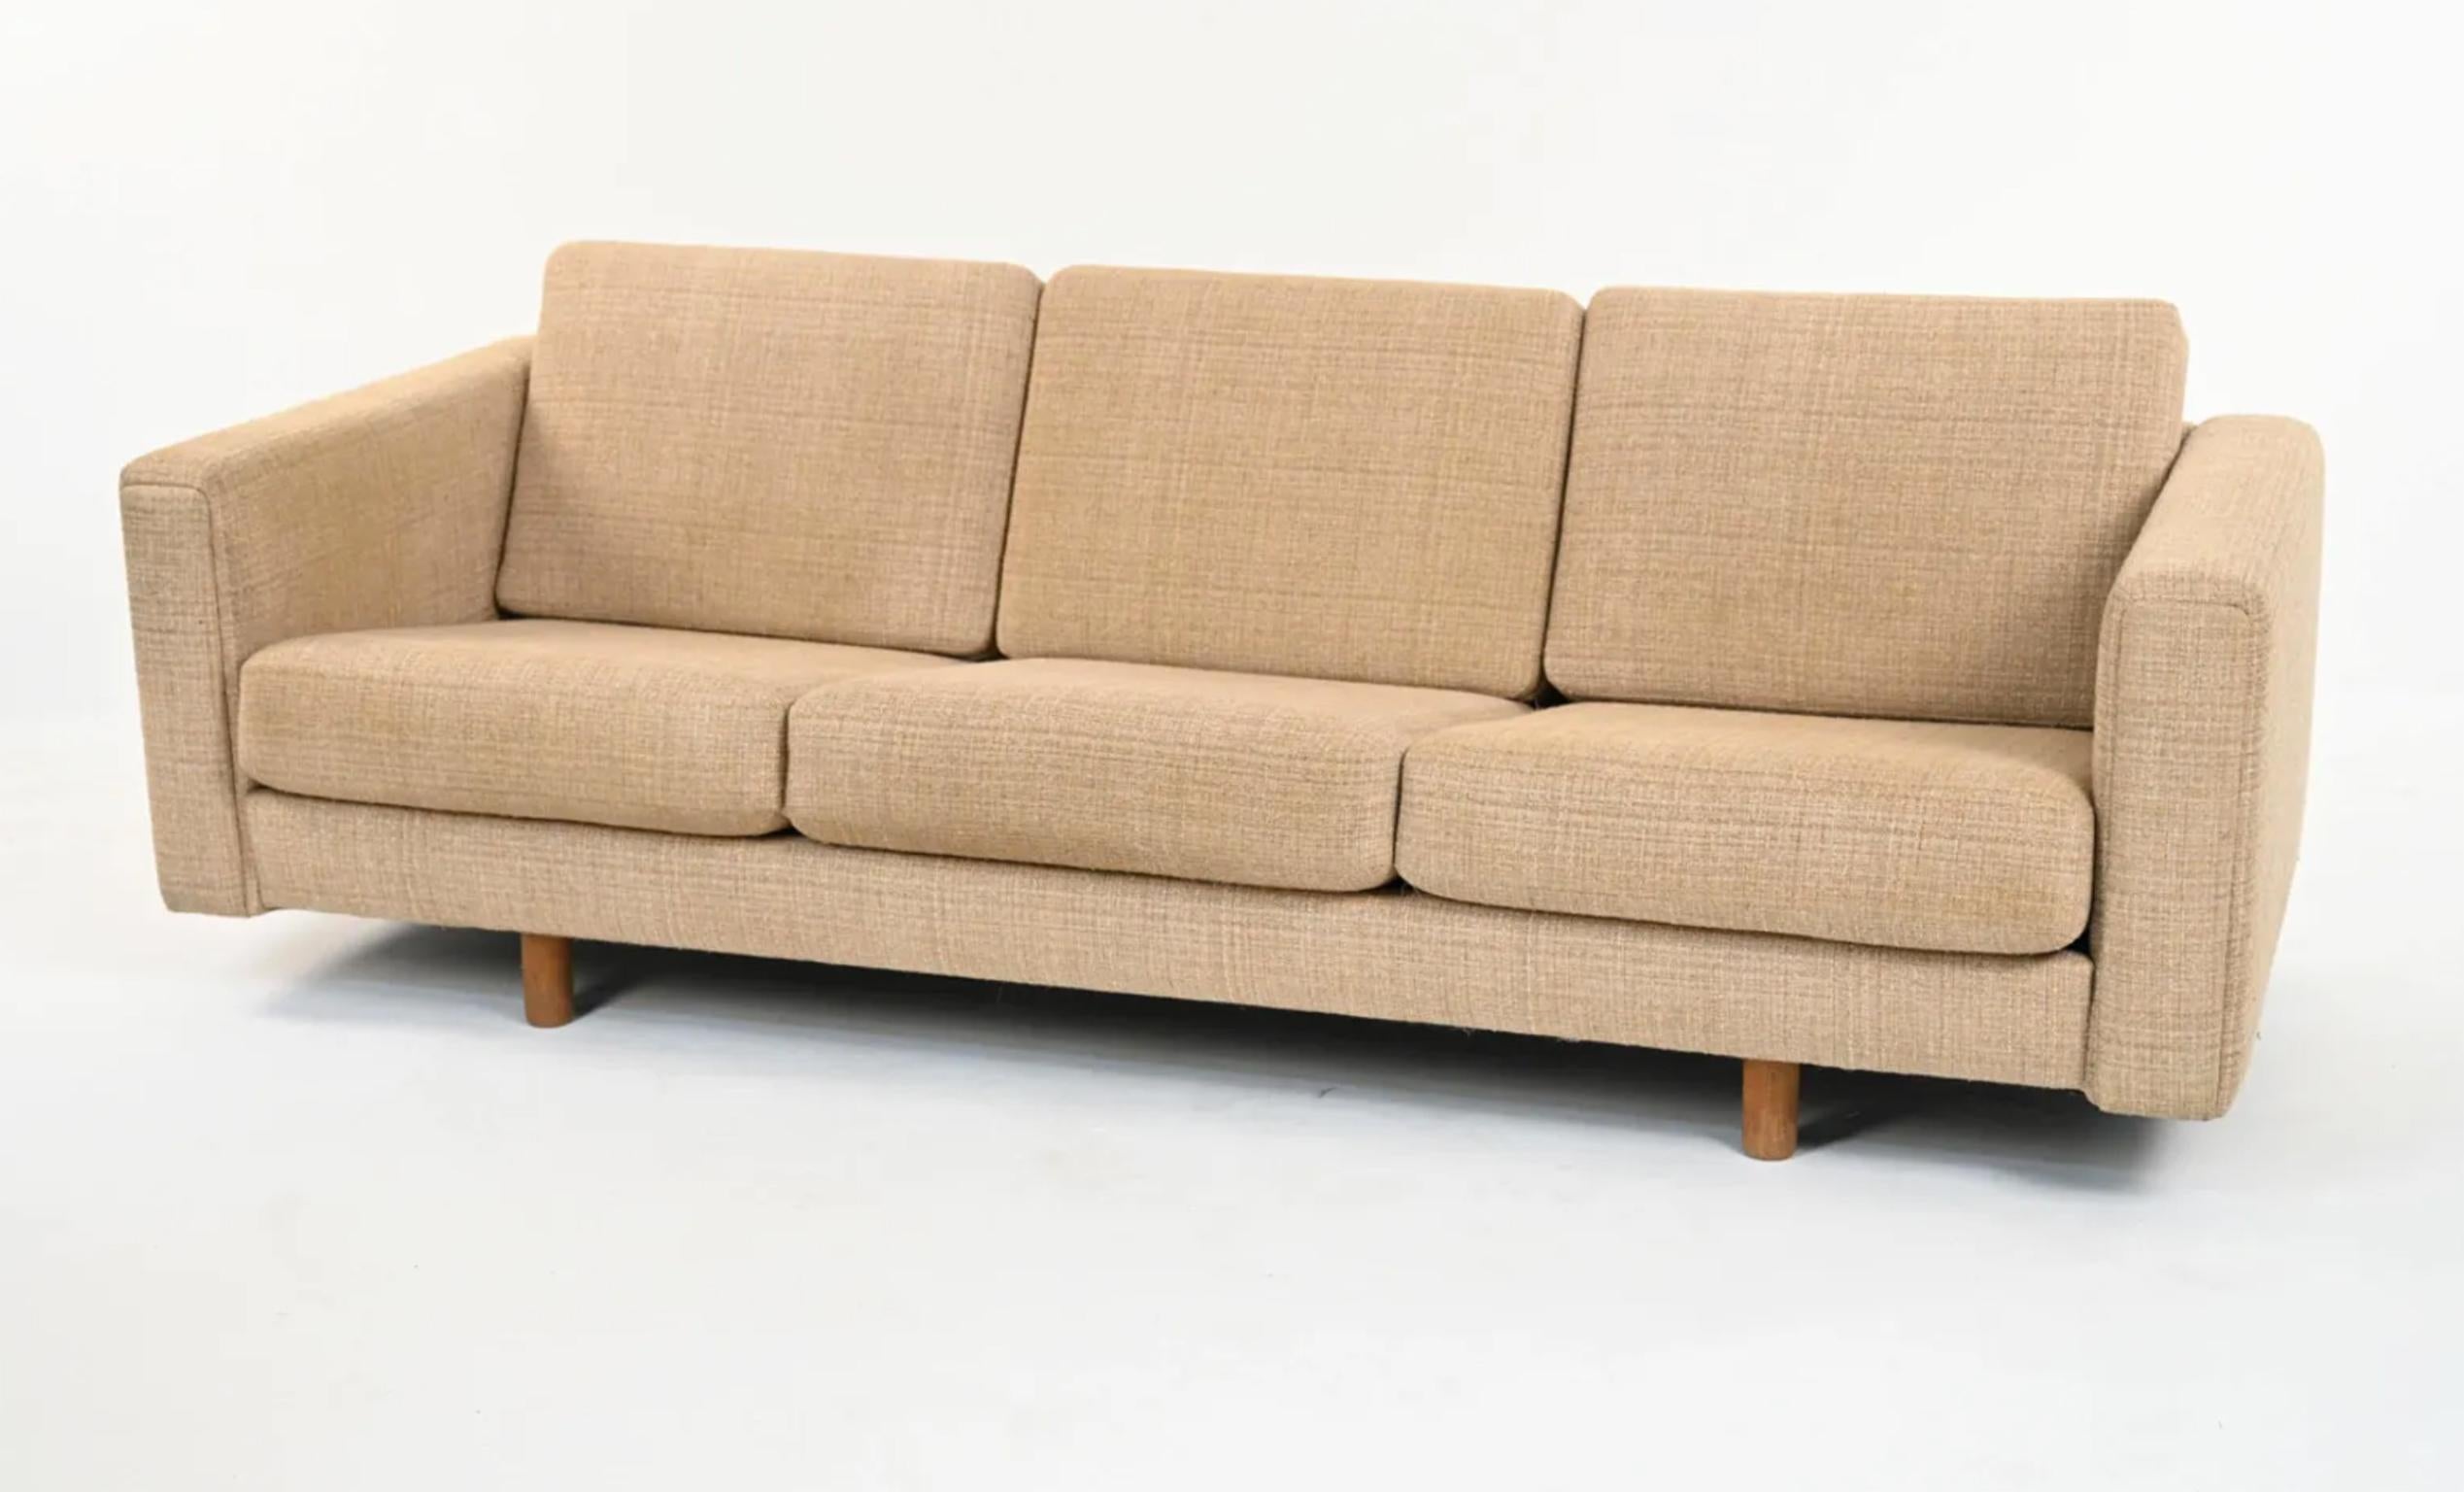 Vintage 1960s Danish three-seat sofa Rare model GE300/3 designed by Hans Wegner for GETAMA Manufacturer solid light oak solid wood frame and legs with original patina has original spring loaded cushions with original Tan Sand woven upholstery in